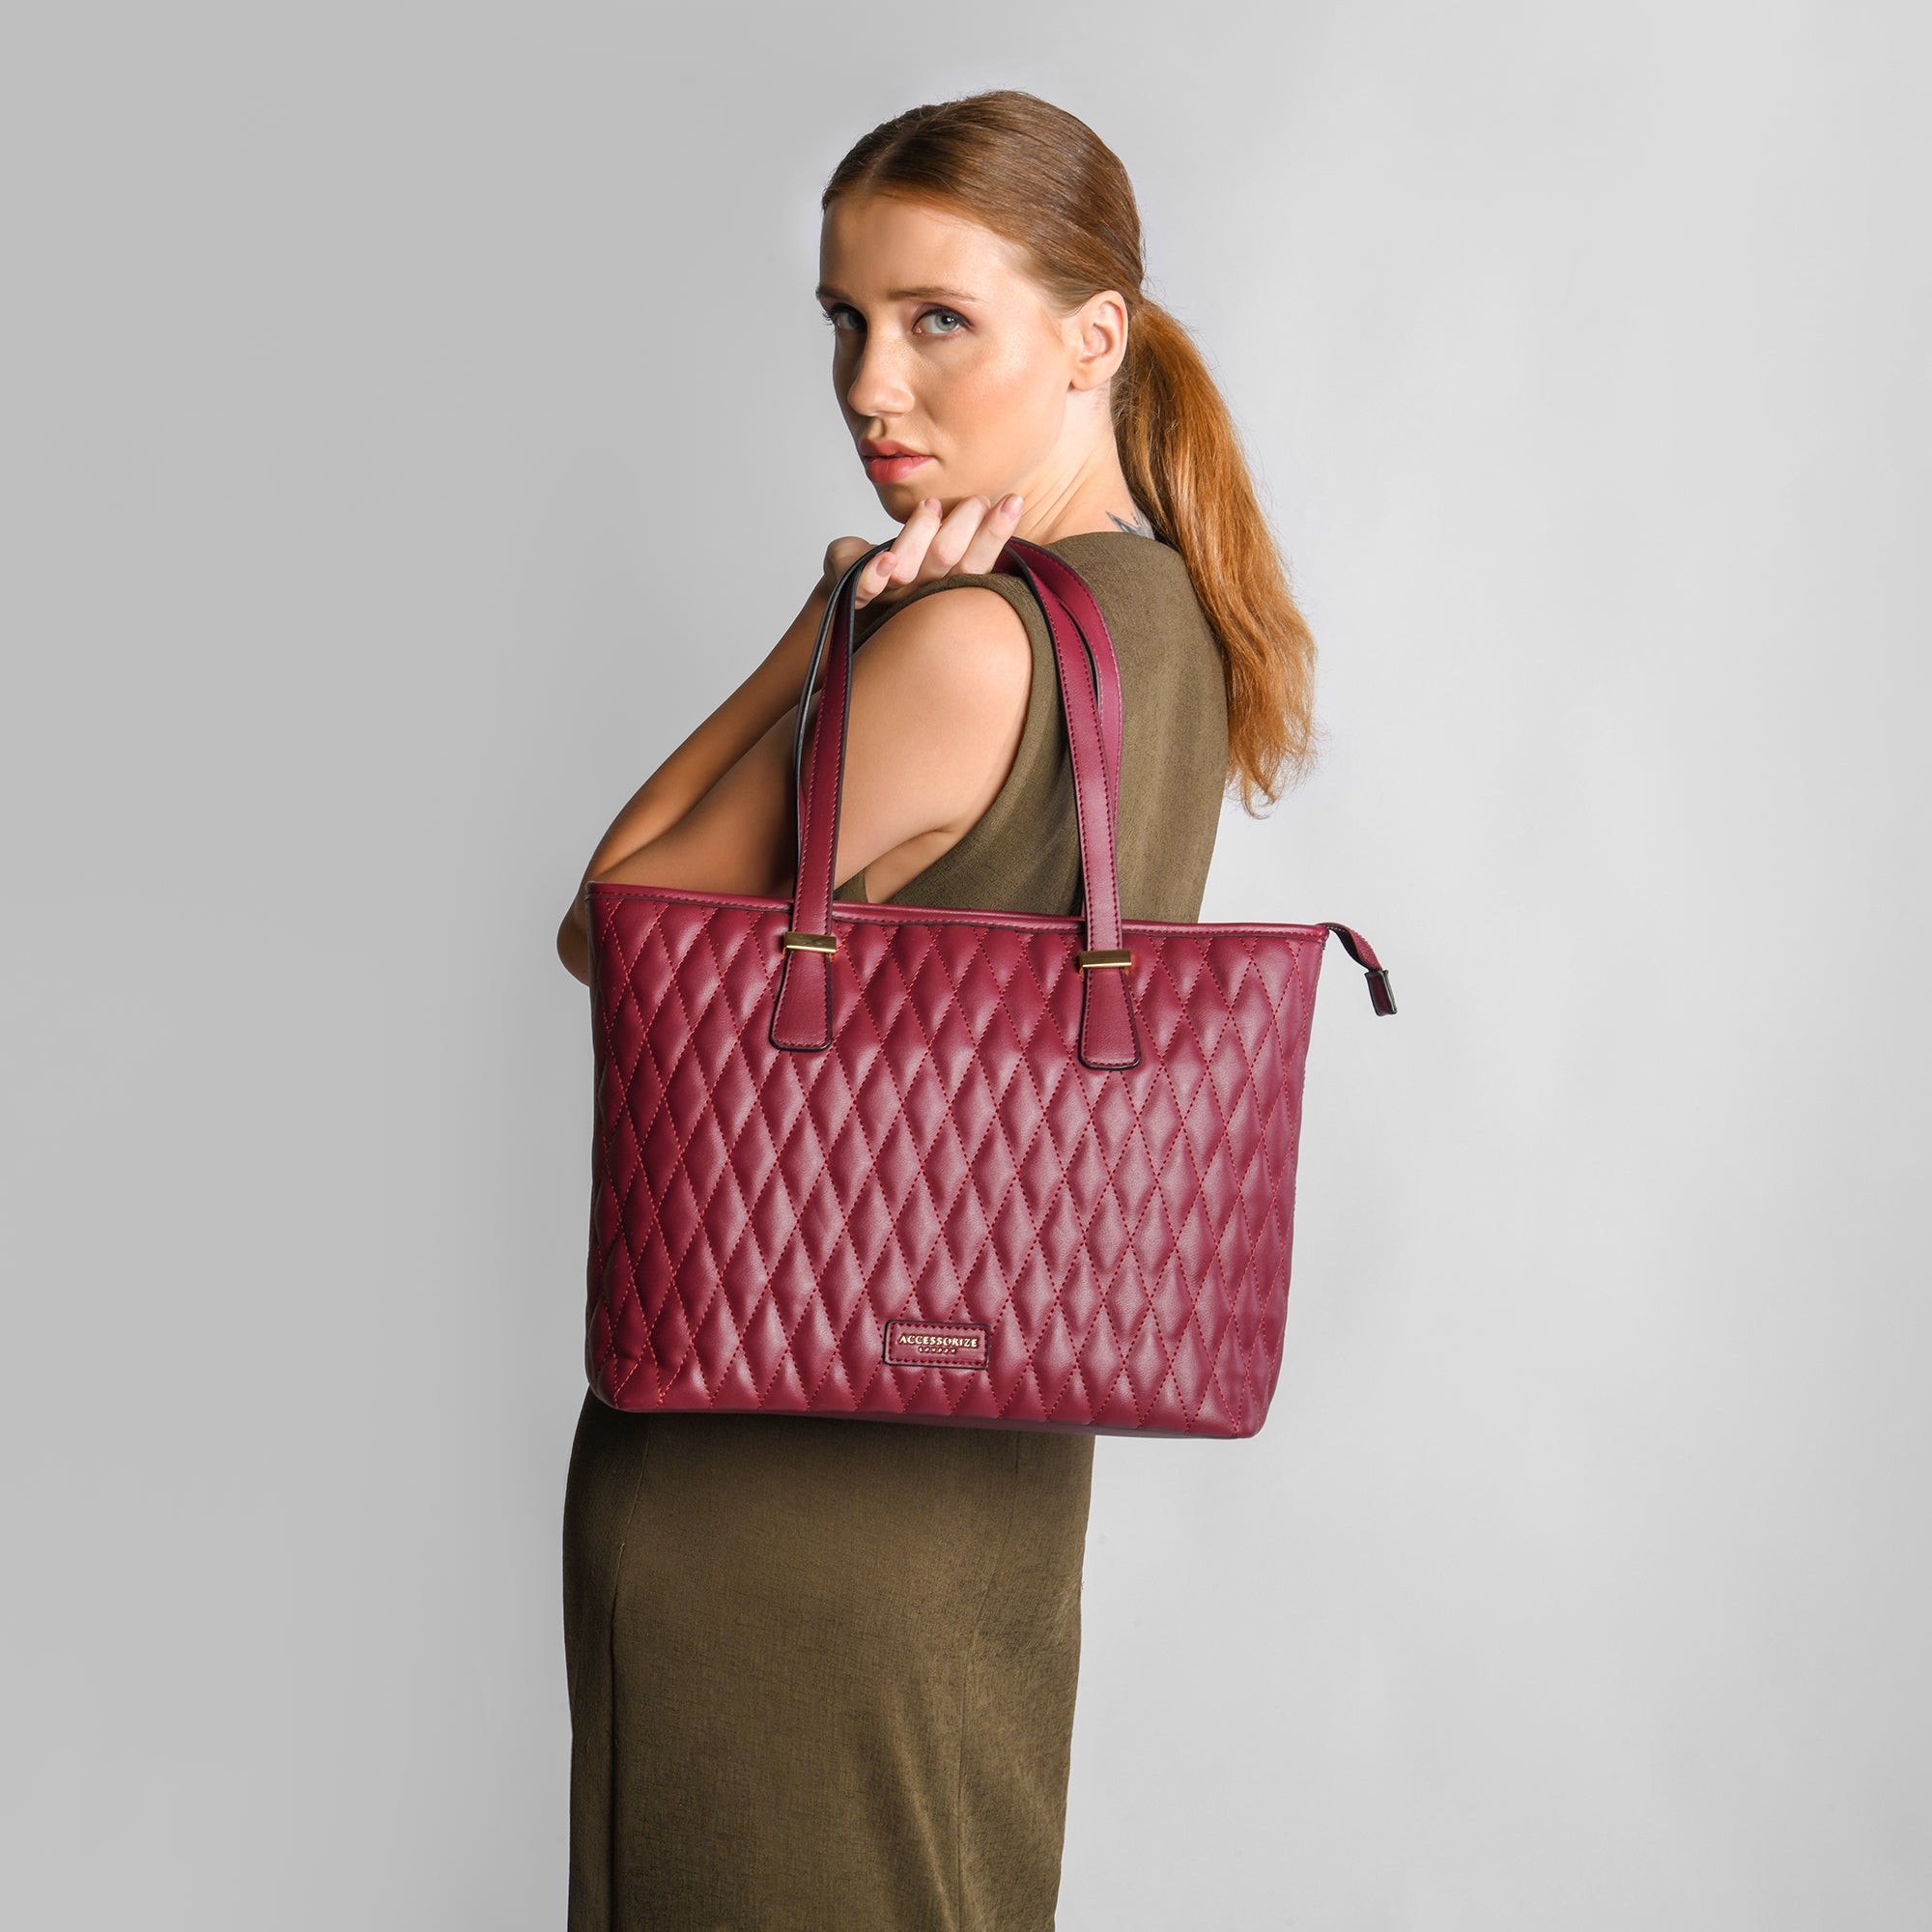 Accessorize London Women's Faux Leather Maroon Lannister quilted tote Bag